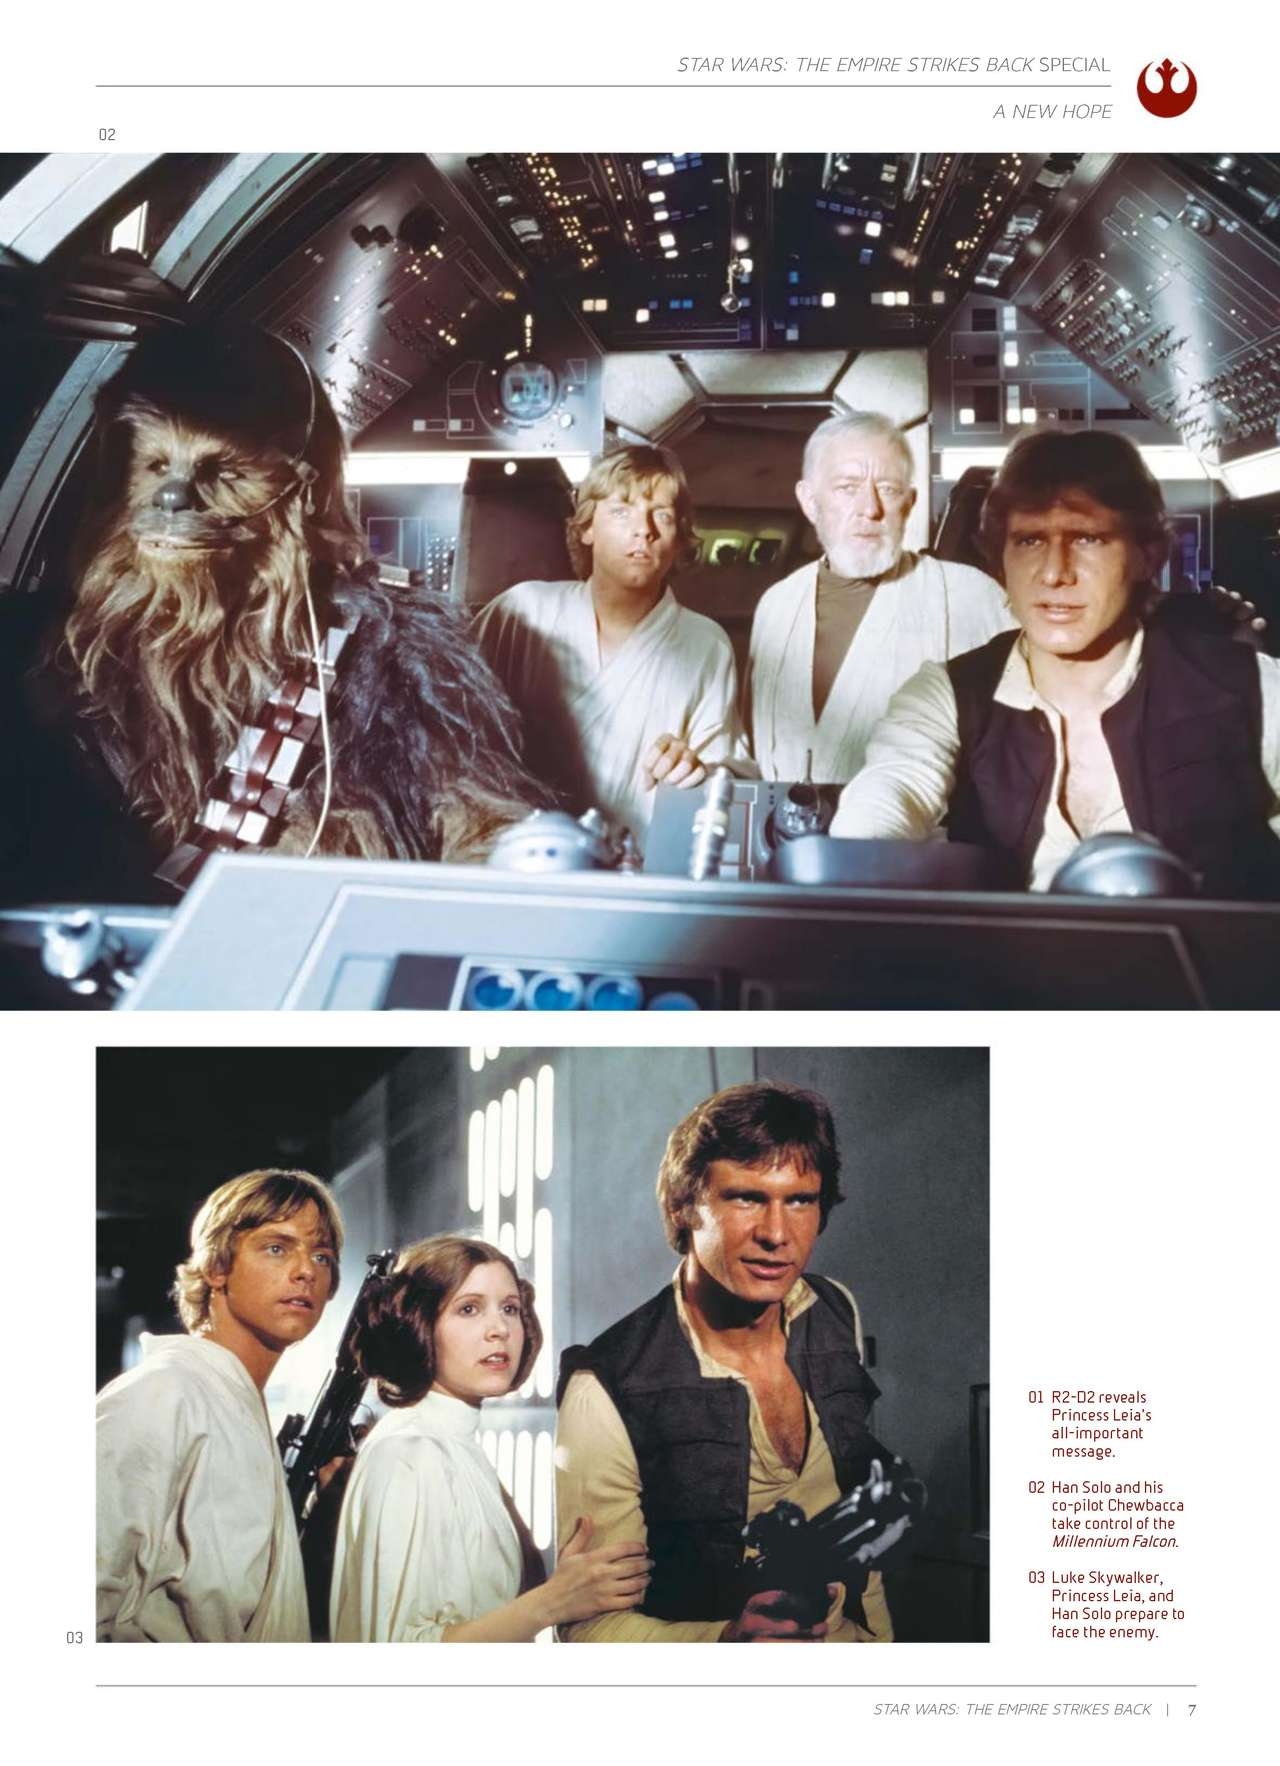 Star Wars - The Empire Strikes Back - The 40th Anniversary Special Edition 8